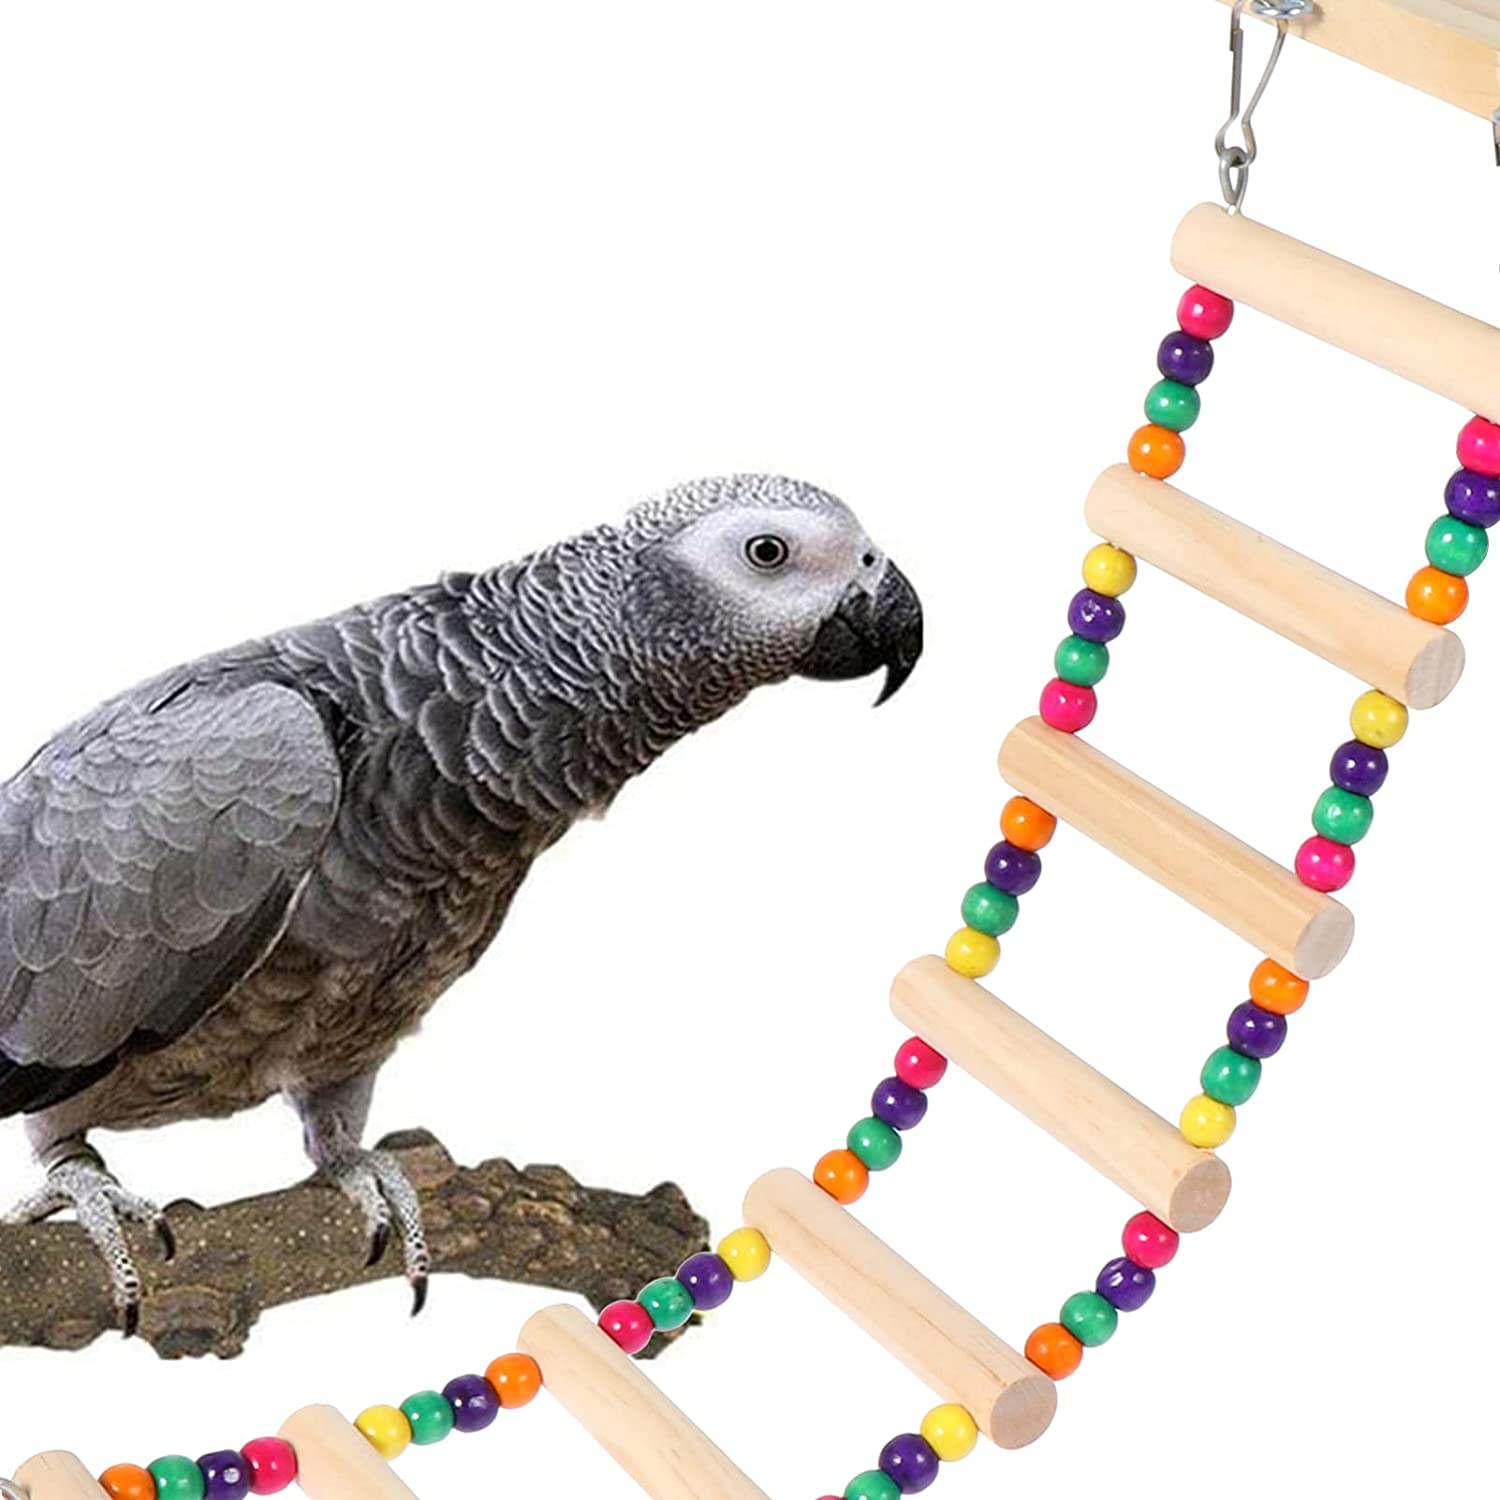 NUOBESTY Bird Ladder Perch Wood Parrot Bird Perch Stand Platform with Swing Bridge for Pet Training Playing Flexible Birds Cage Accessories Animals & Pet Supplies > Pet Supplies > Bird Supplies > Bird Ladders & Perches NUOBESTY   